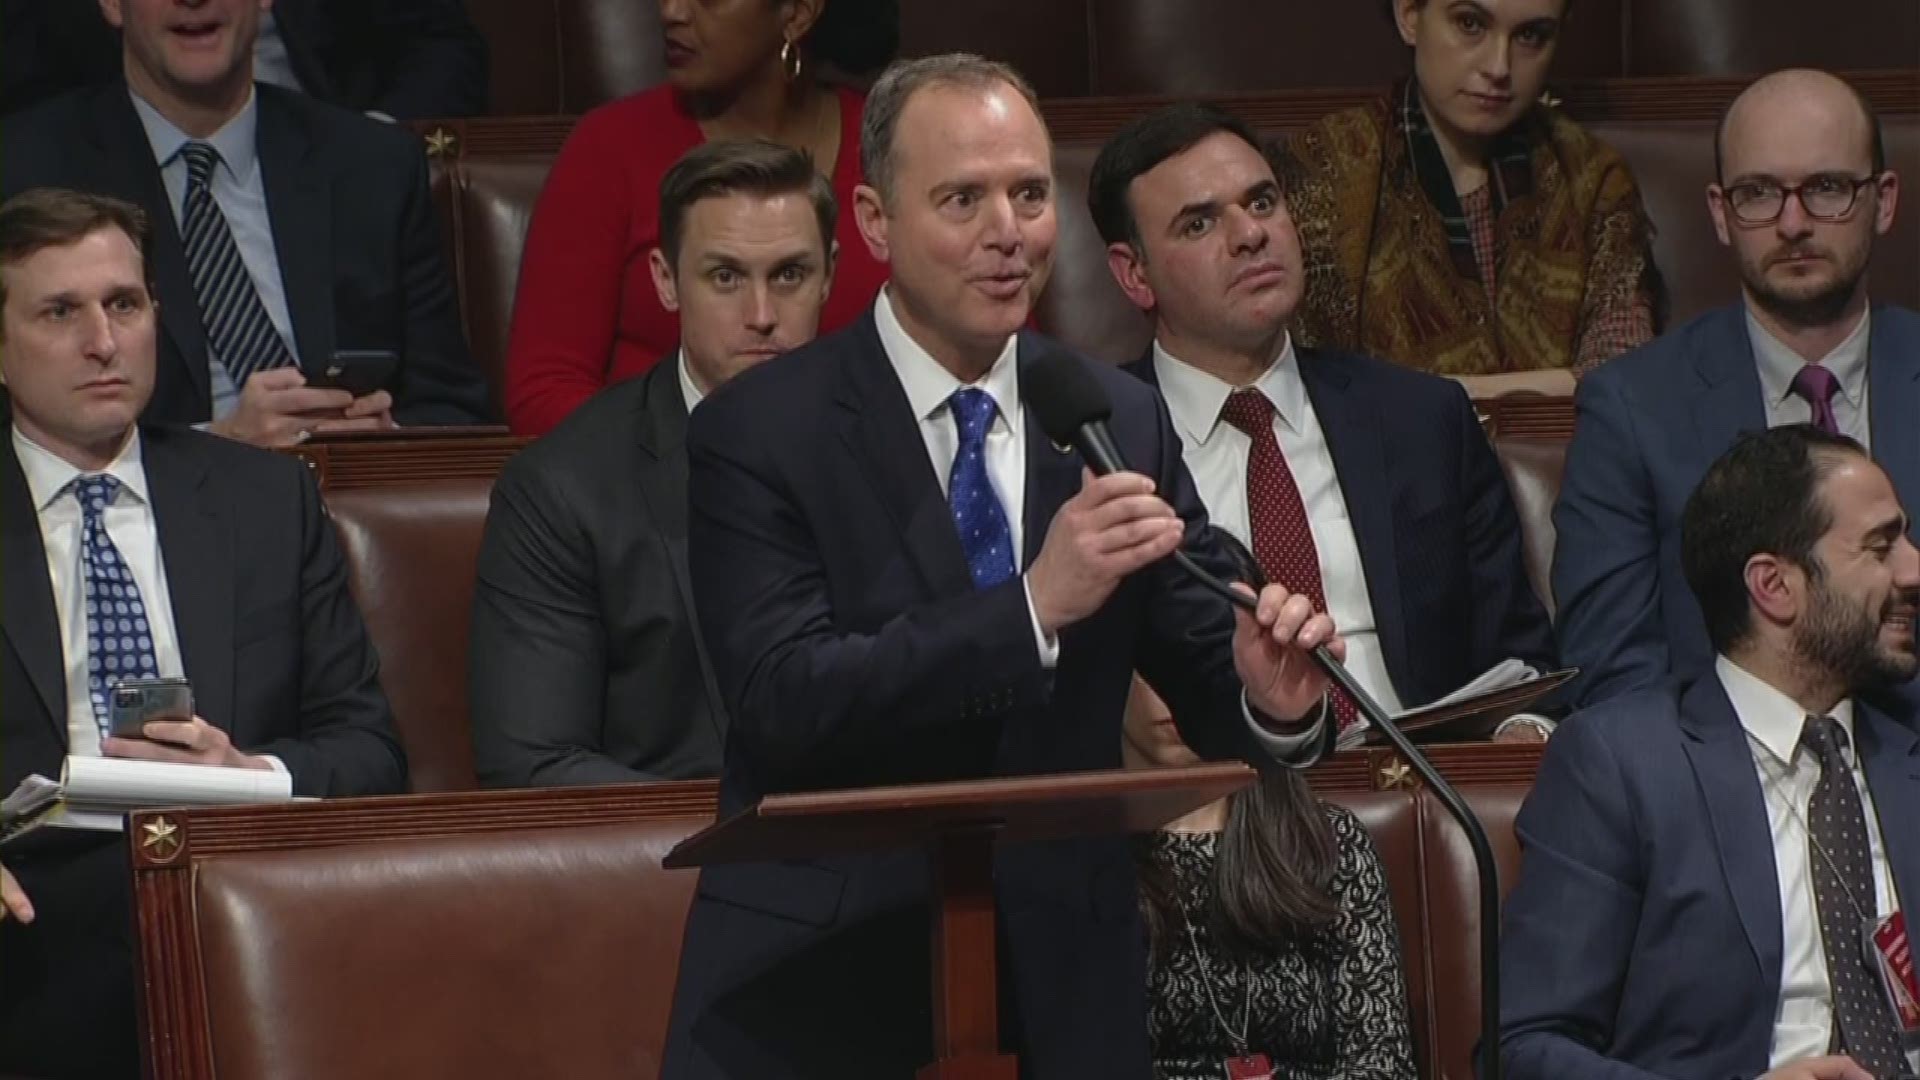 House member Adam Schiff was apparently interrupted by a fellow House member who spoke out of turn during his impeachment debate remarks.